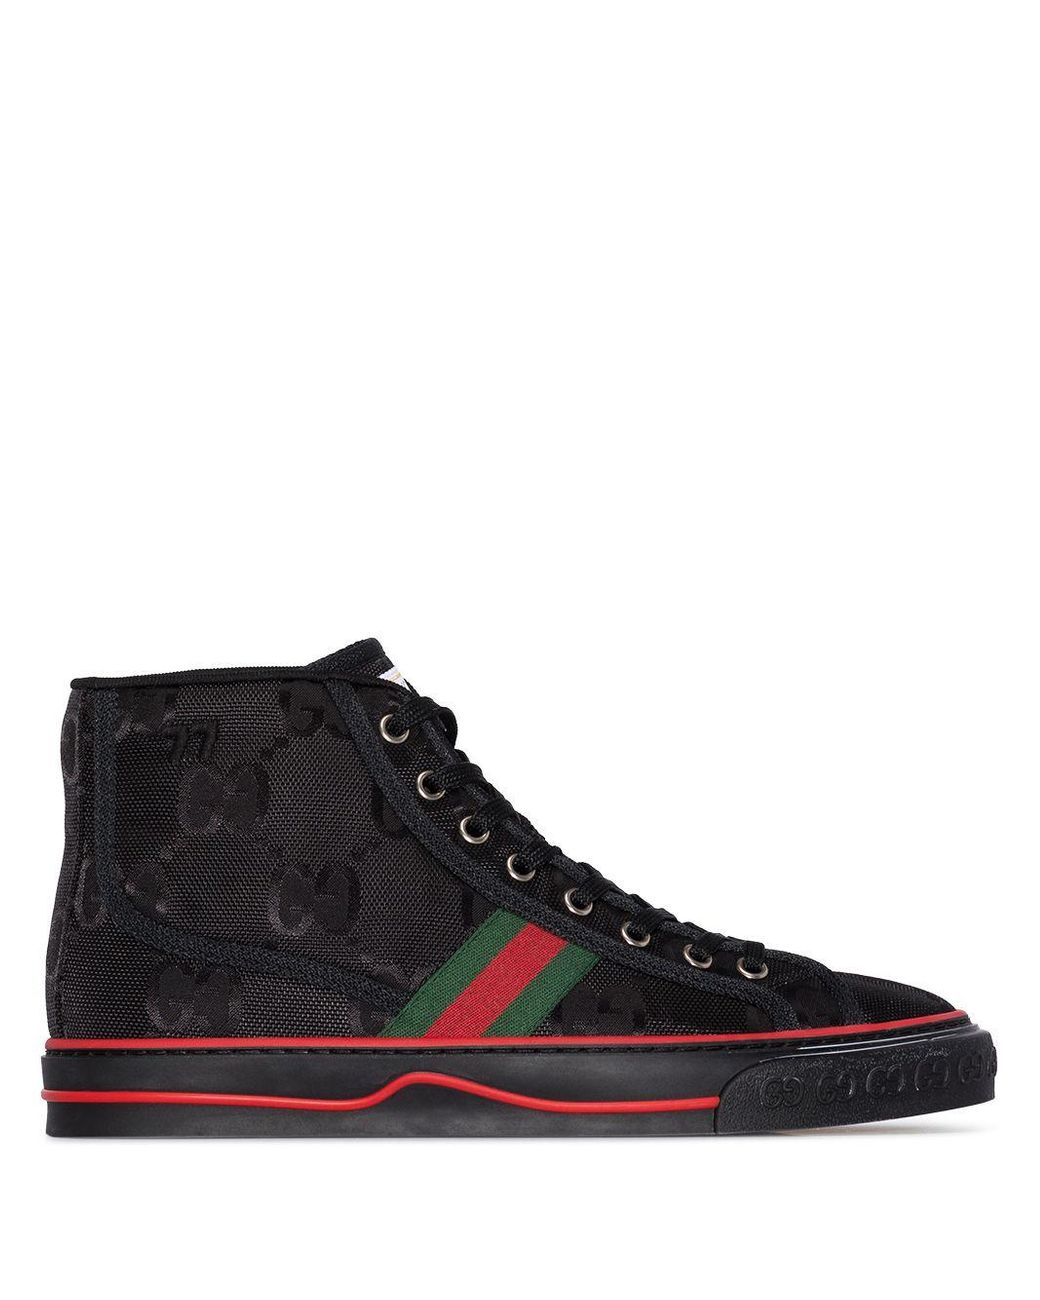 Gucci Off The Grid High Top Sneakers in Black - Lyst